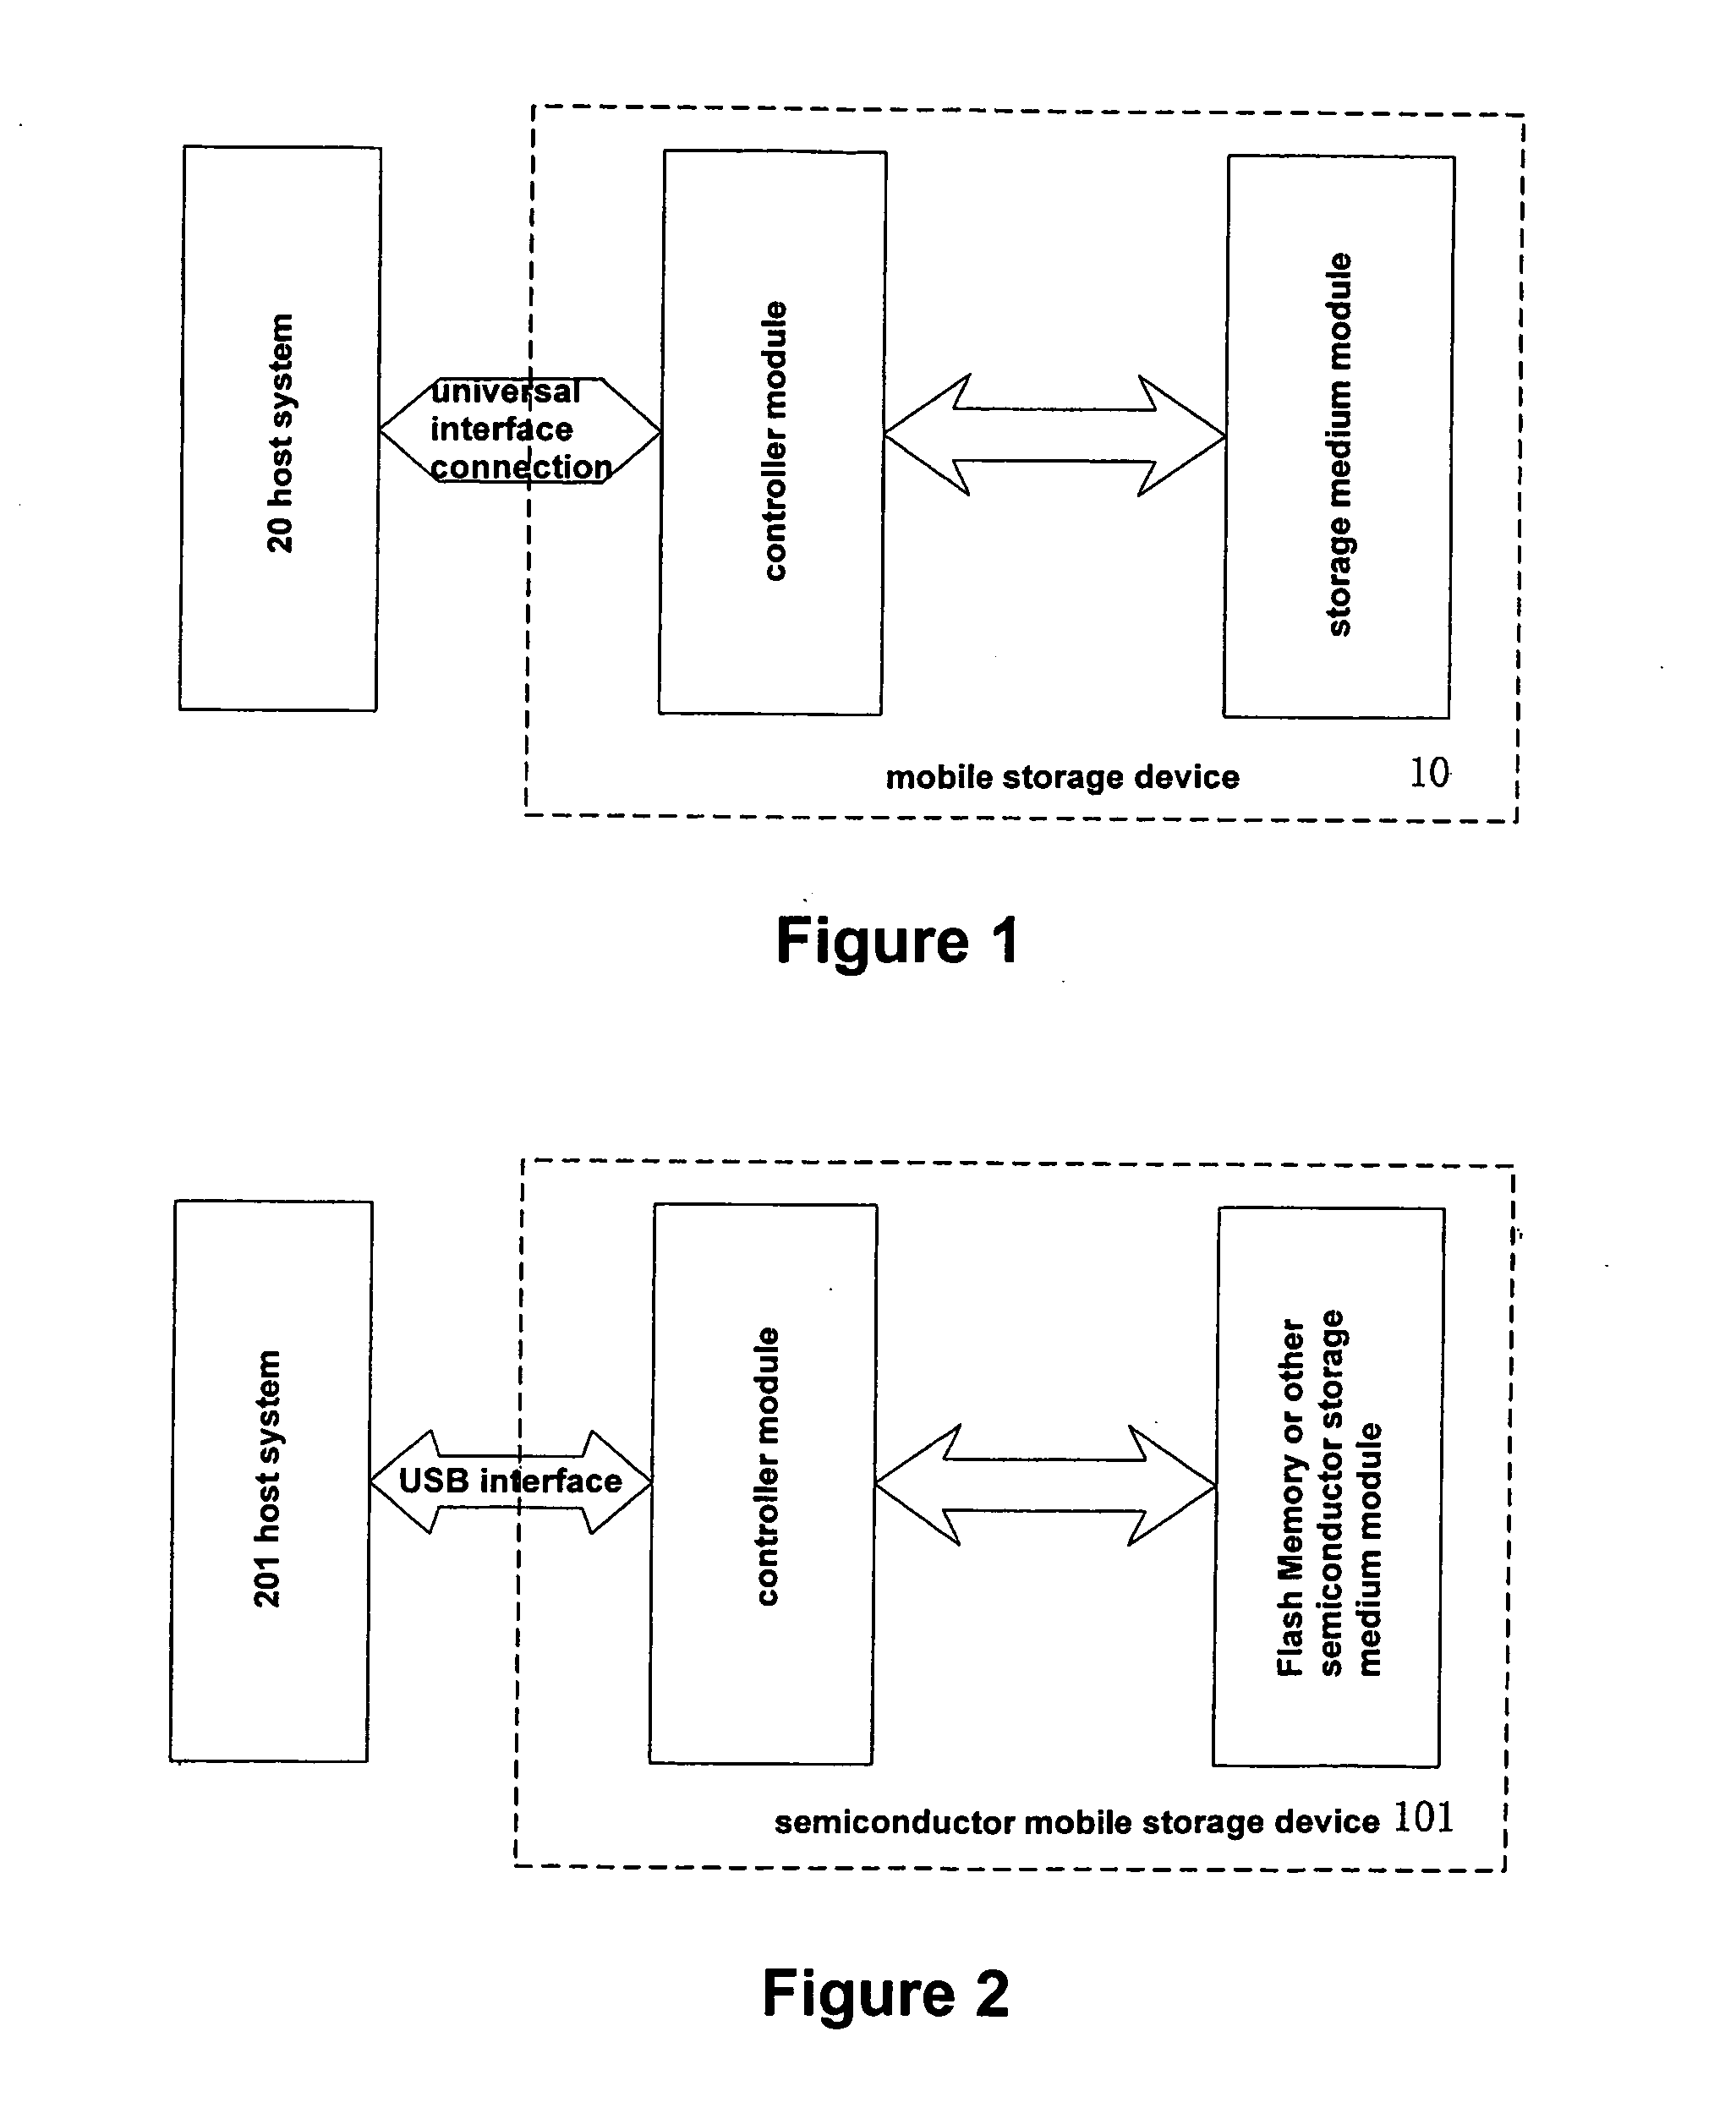 Method of sending command and data to movable storage device